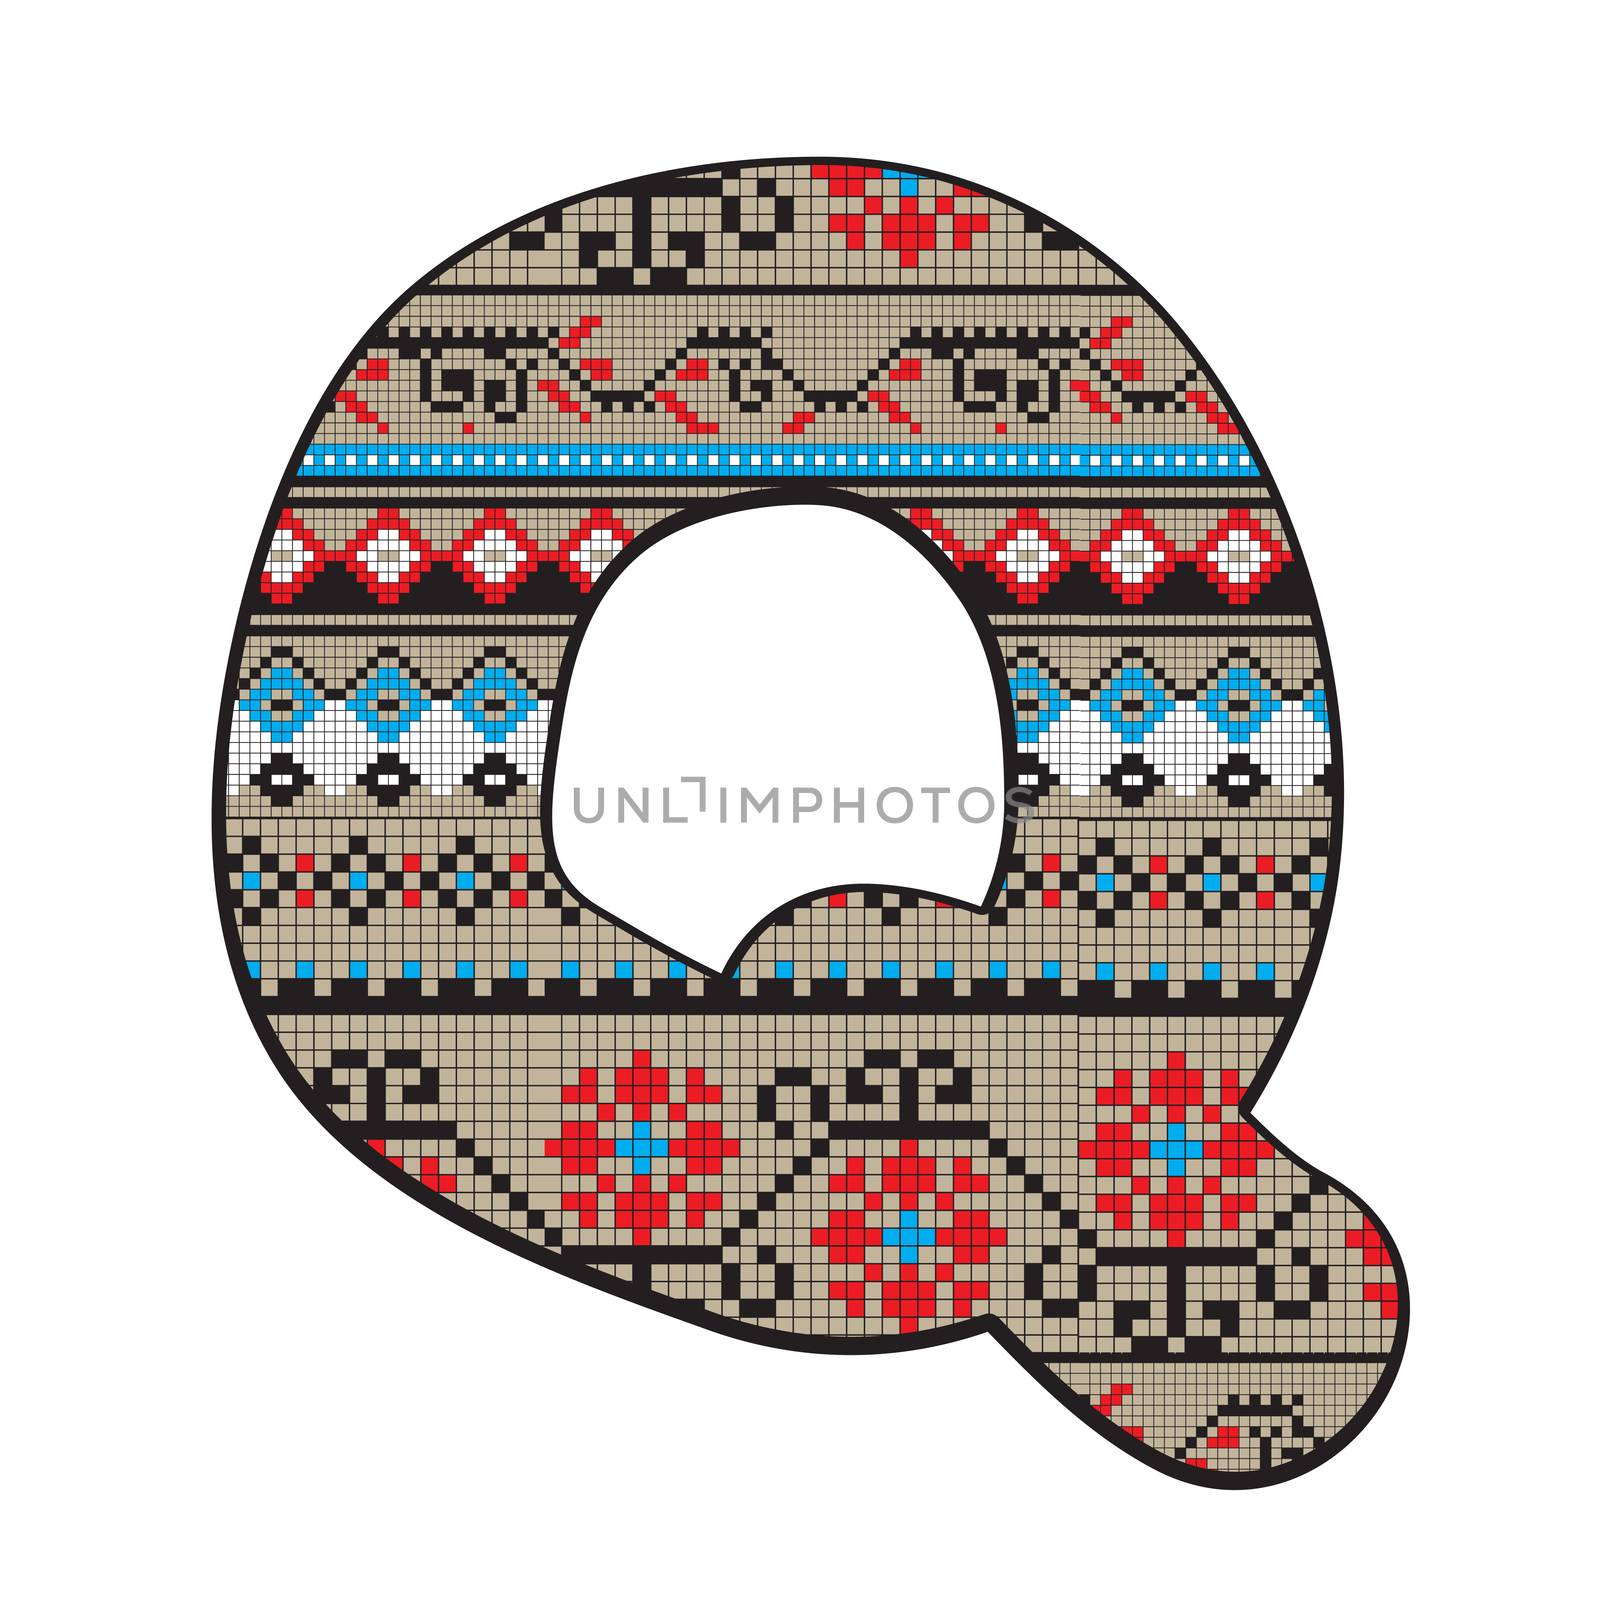 Decorated original font, pixel art ethnic model inspired by a Balkan motif over a funny fat capital letter Q isolated on white